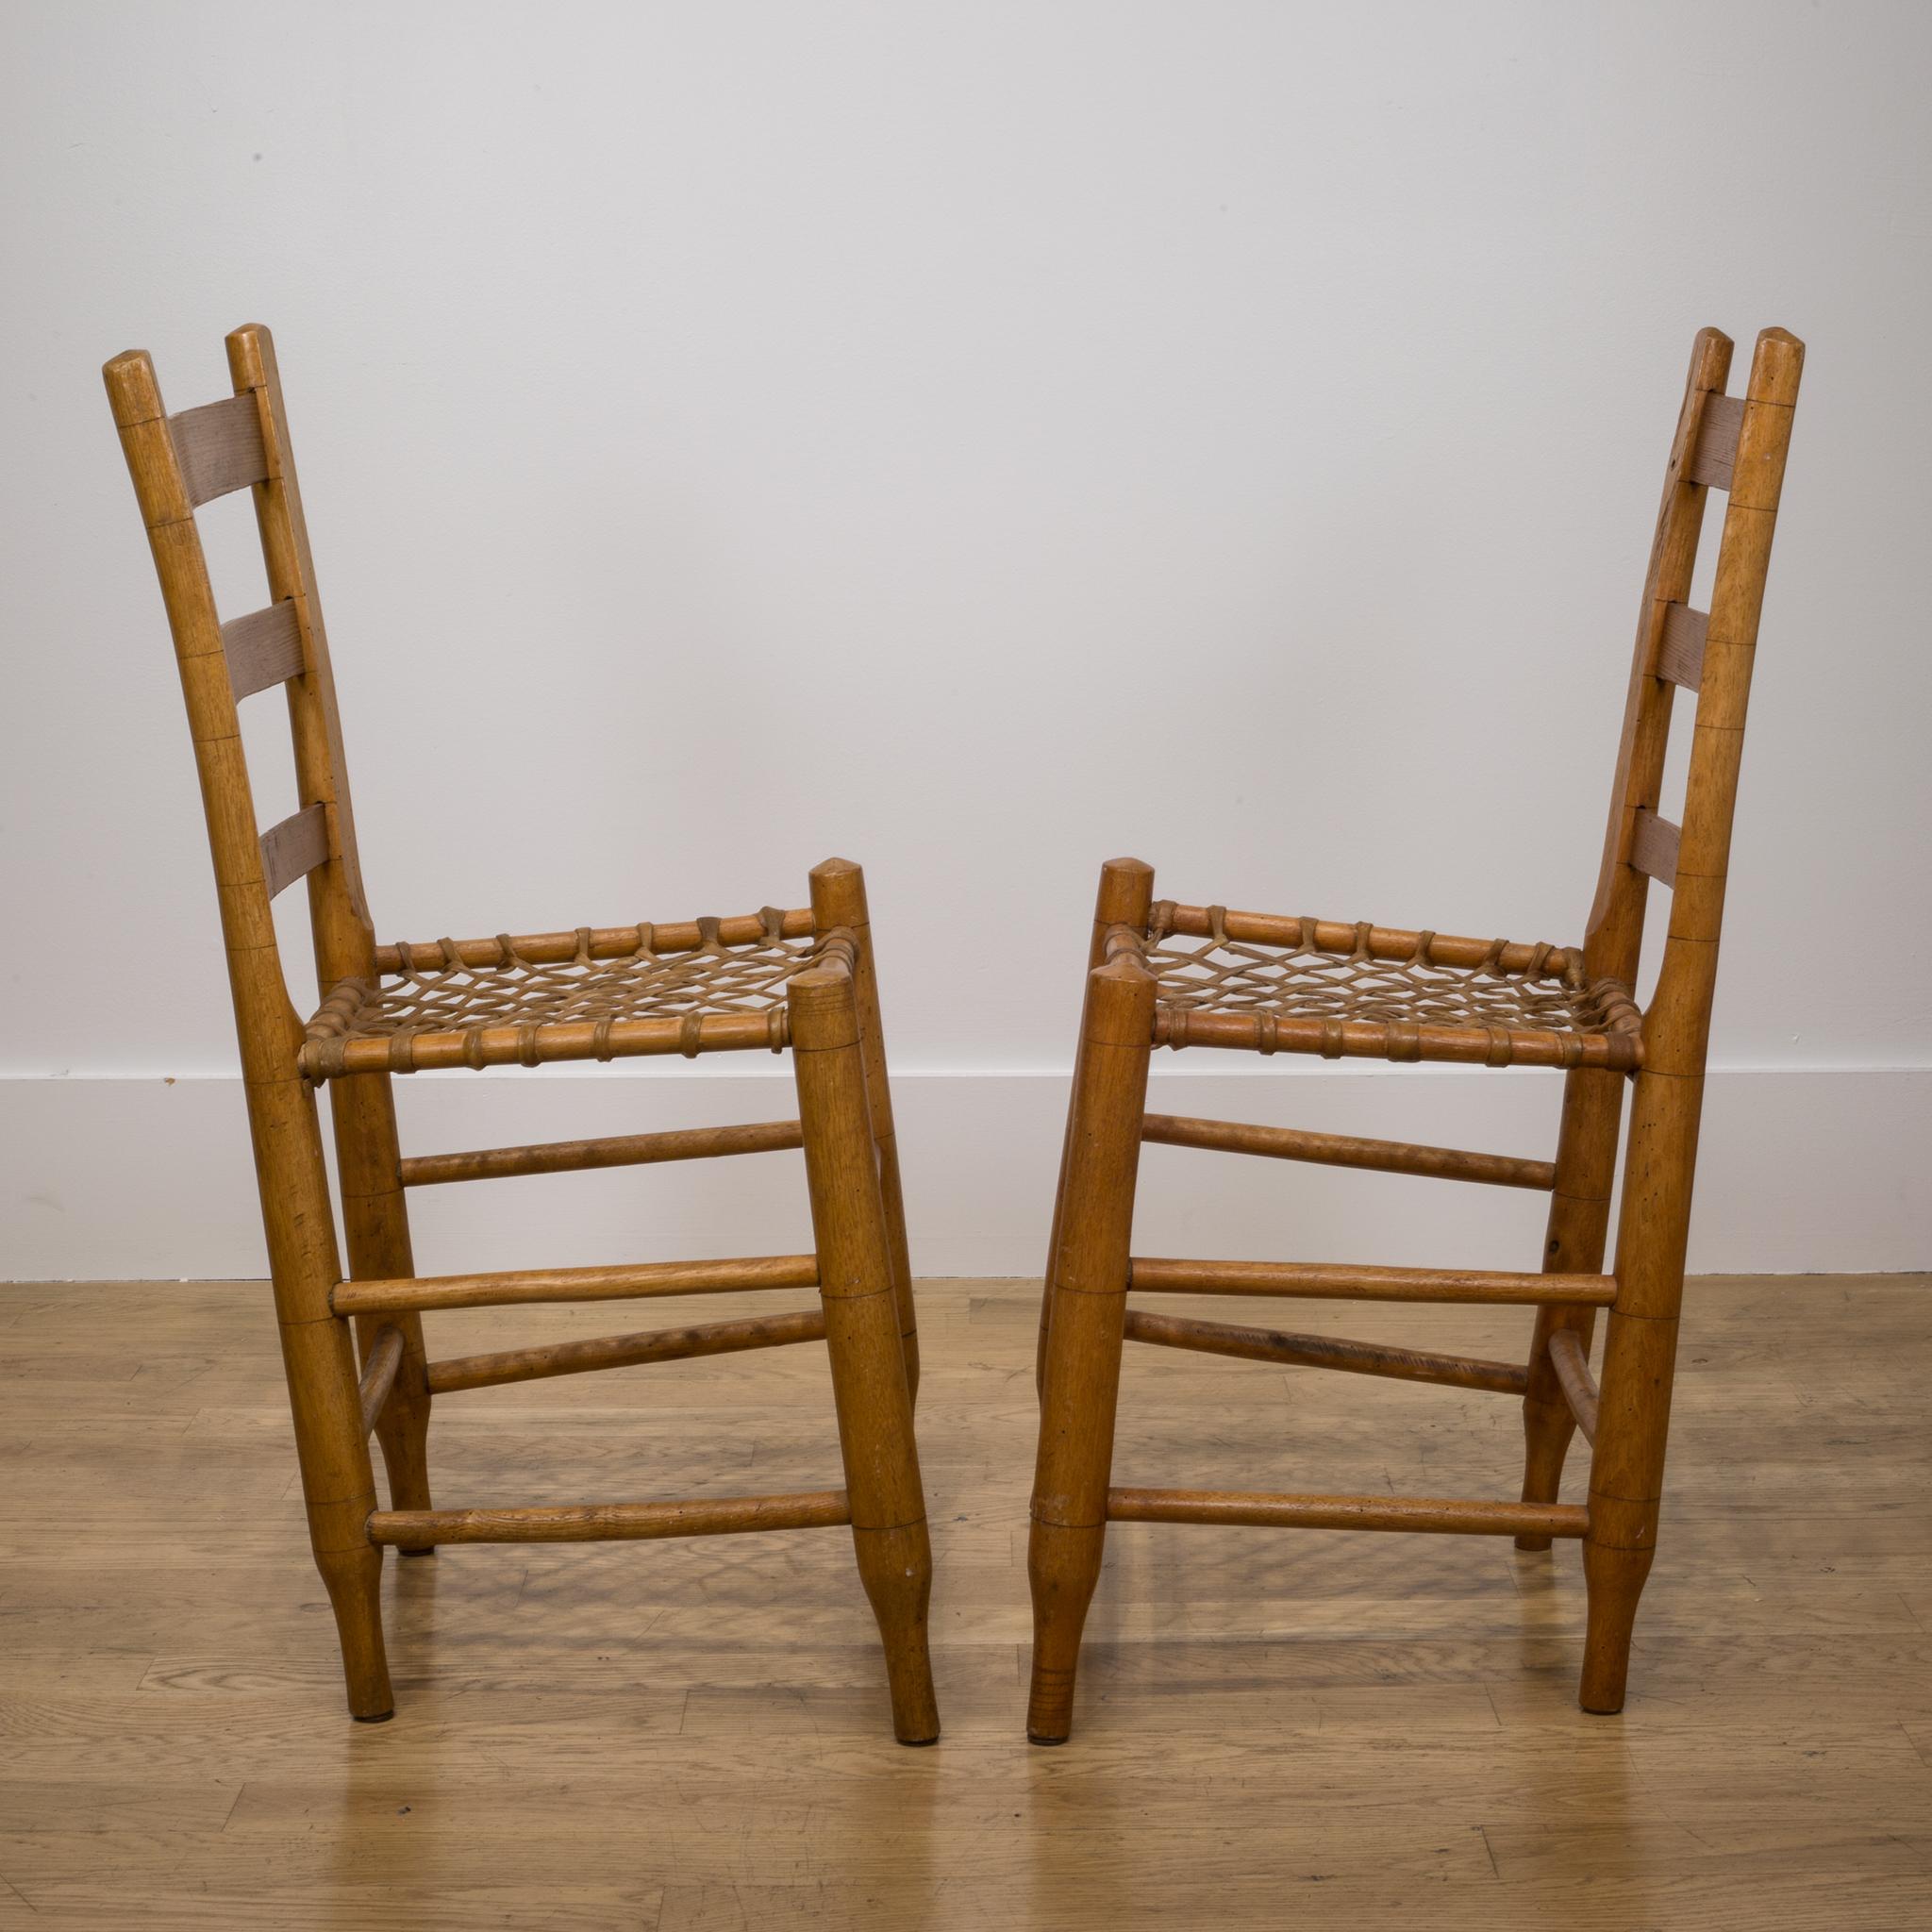 American 19th Century Rawhide Chairs from Historic Oregon Commune, circa 1856